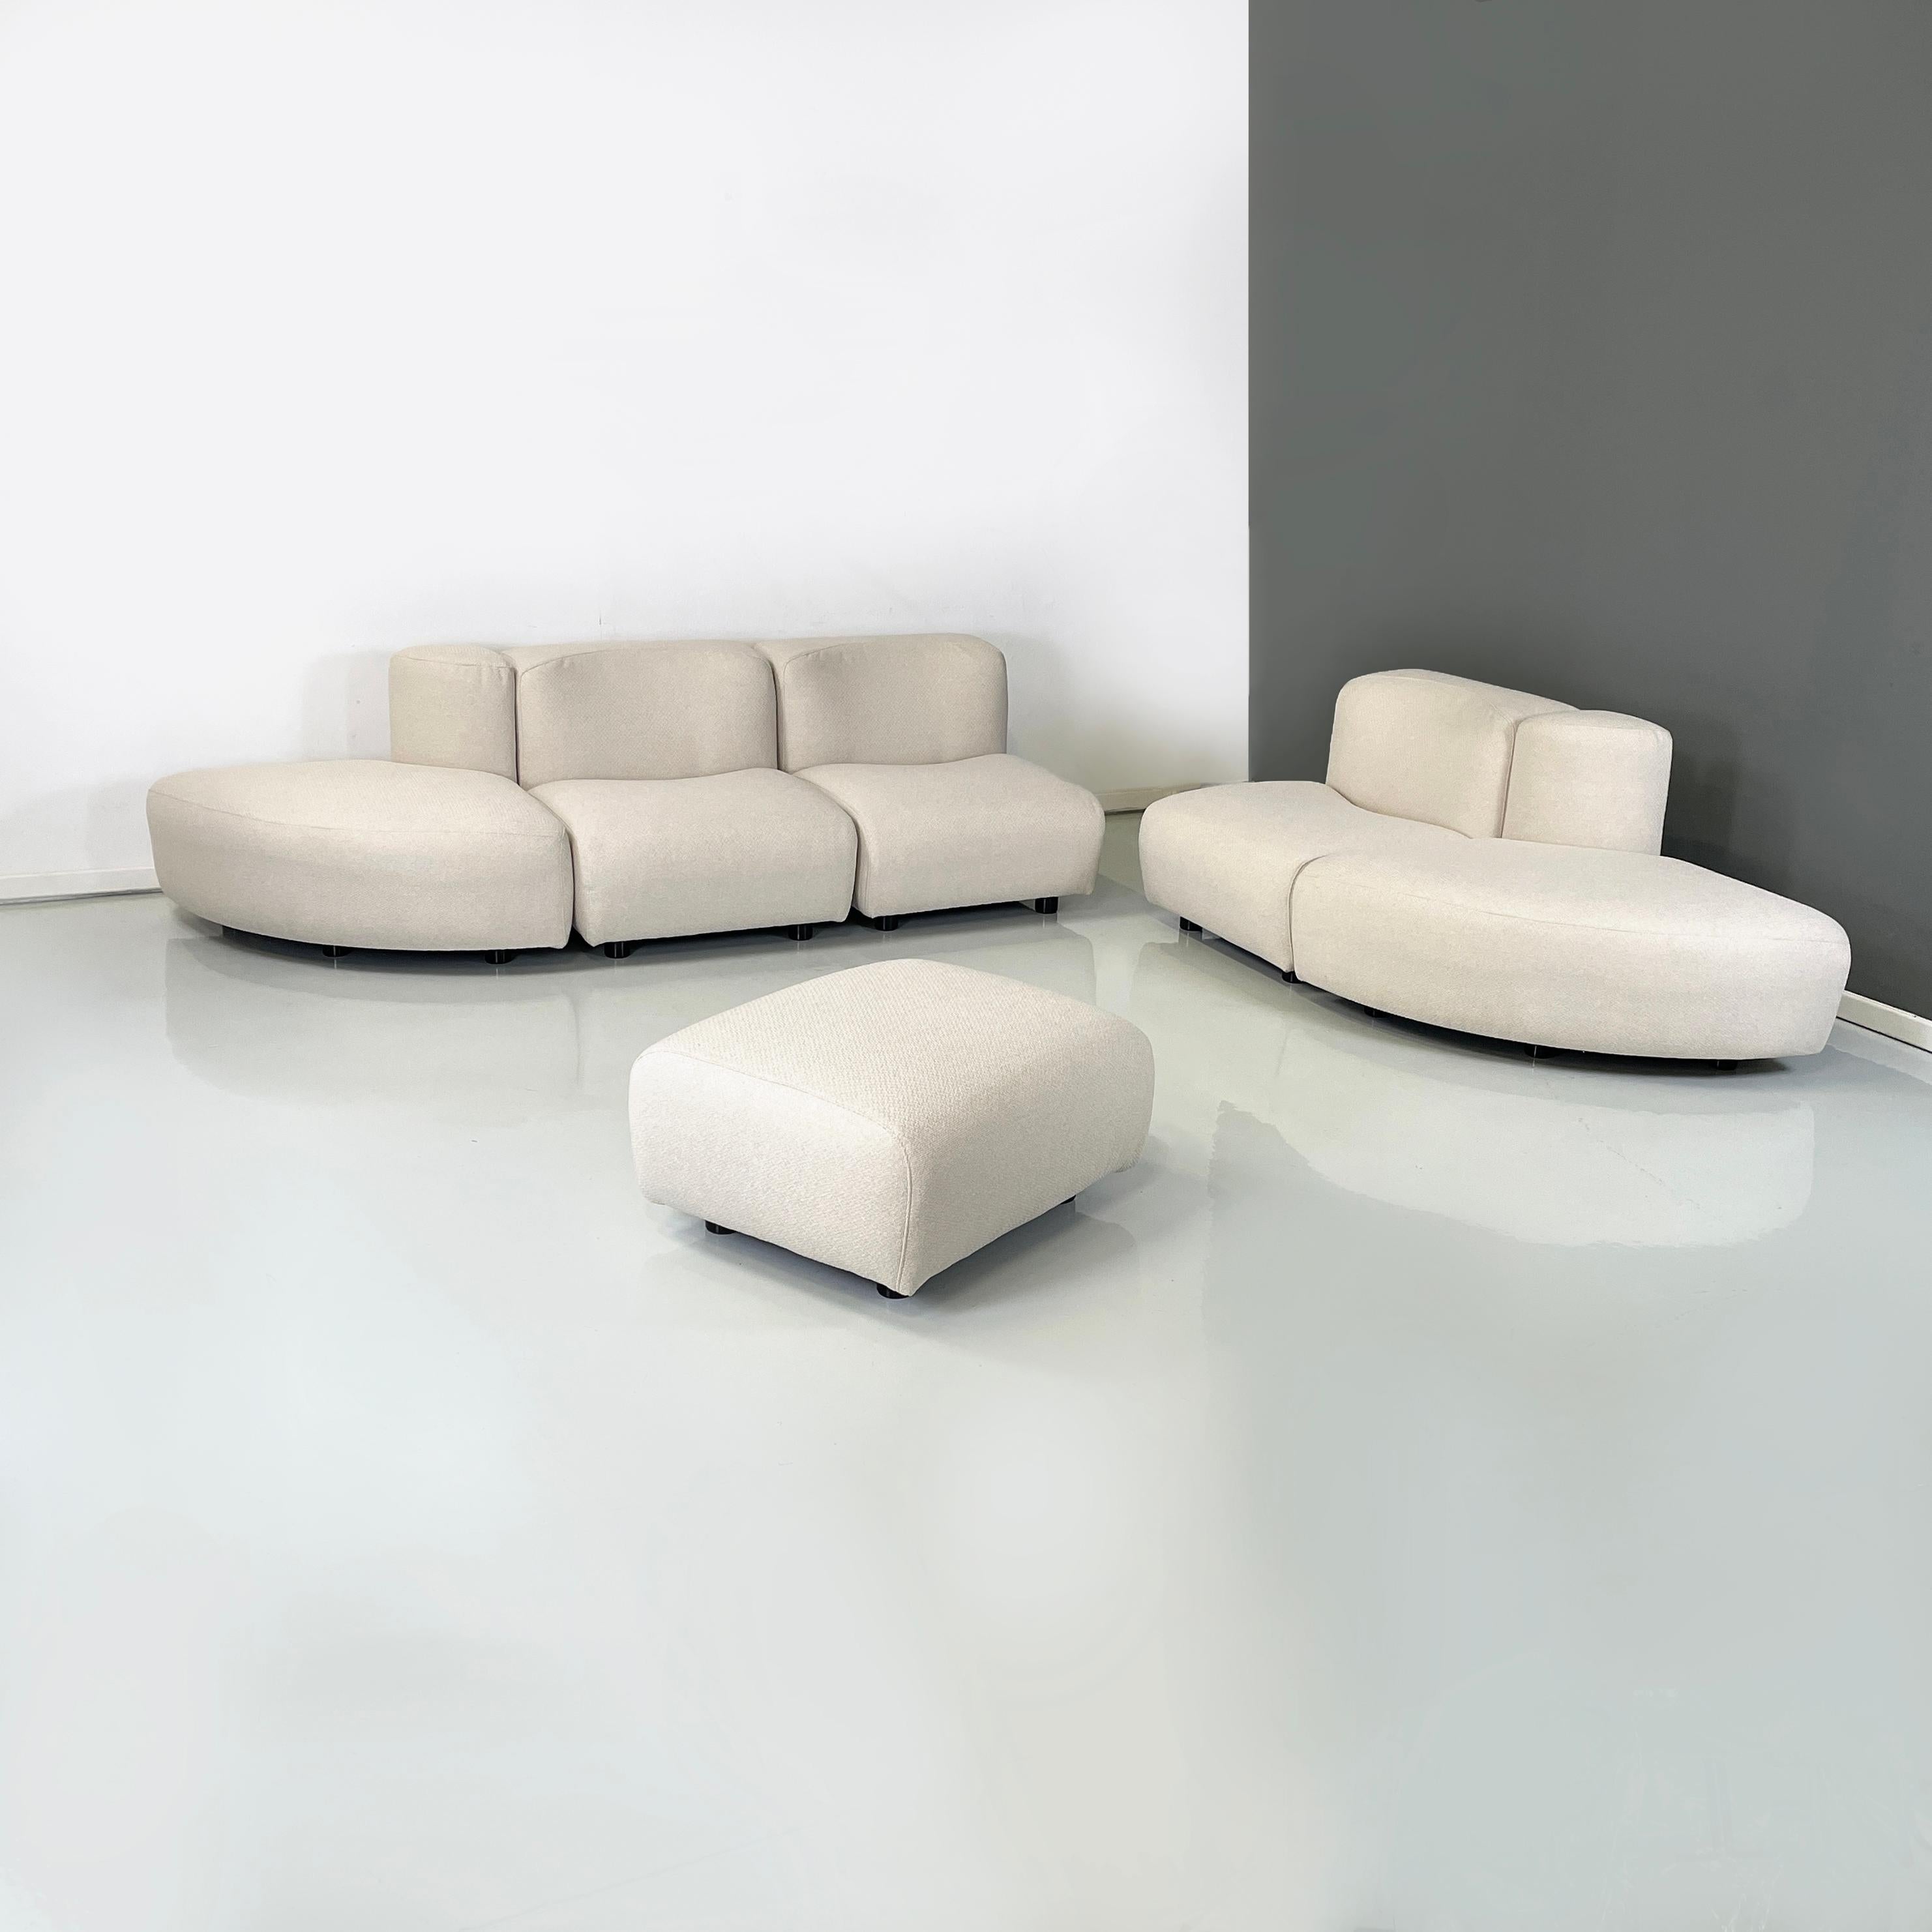 Italian modern Beige modular sofa Novemila by Tito Agnoli for Arflex, 1970s
Modular sofa mod. Novemila made up of 6 modules entirely padded and covered in white-beige fabric. The 3 simple modules are composed of a square seat and a concave backrest.